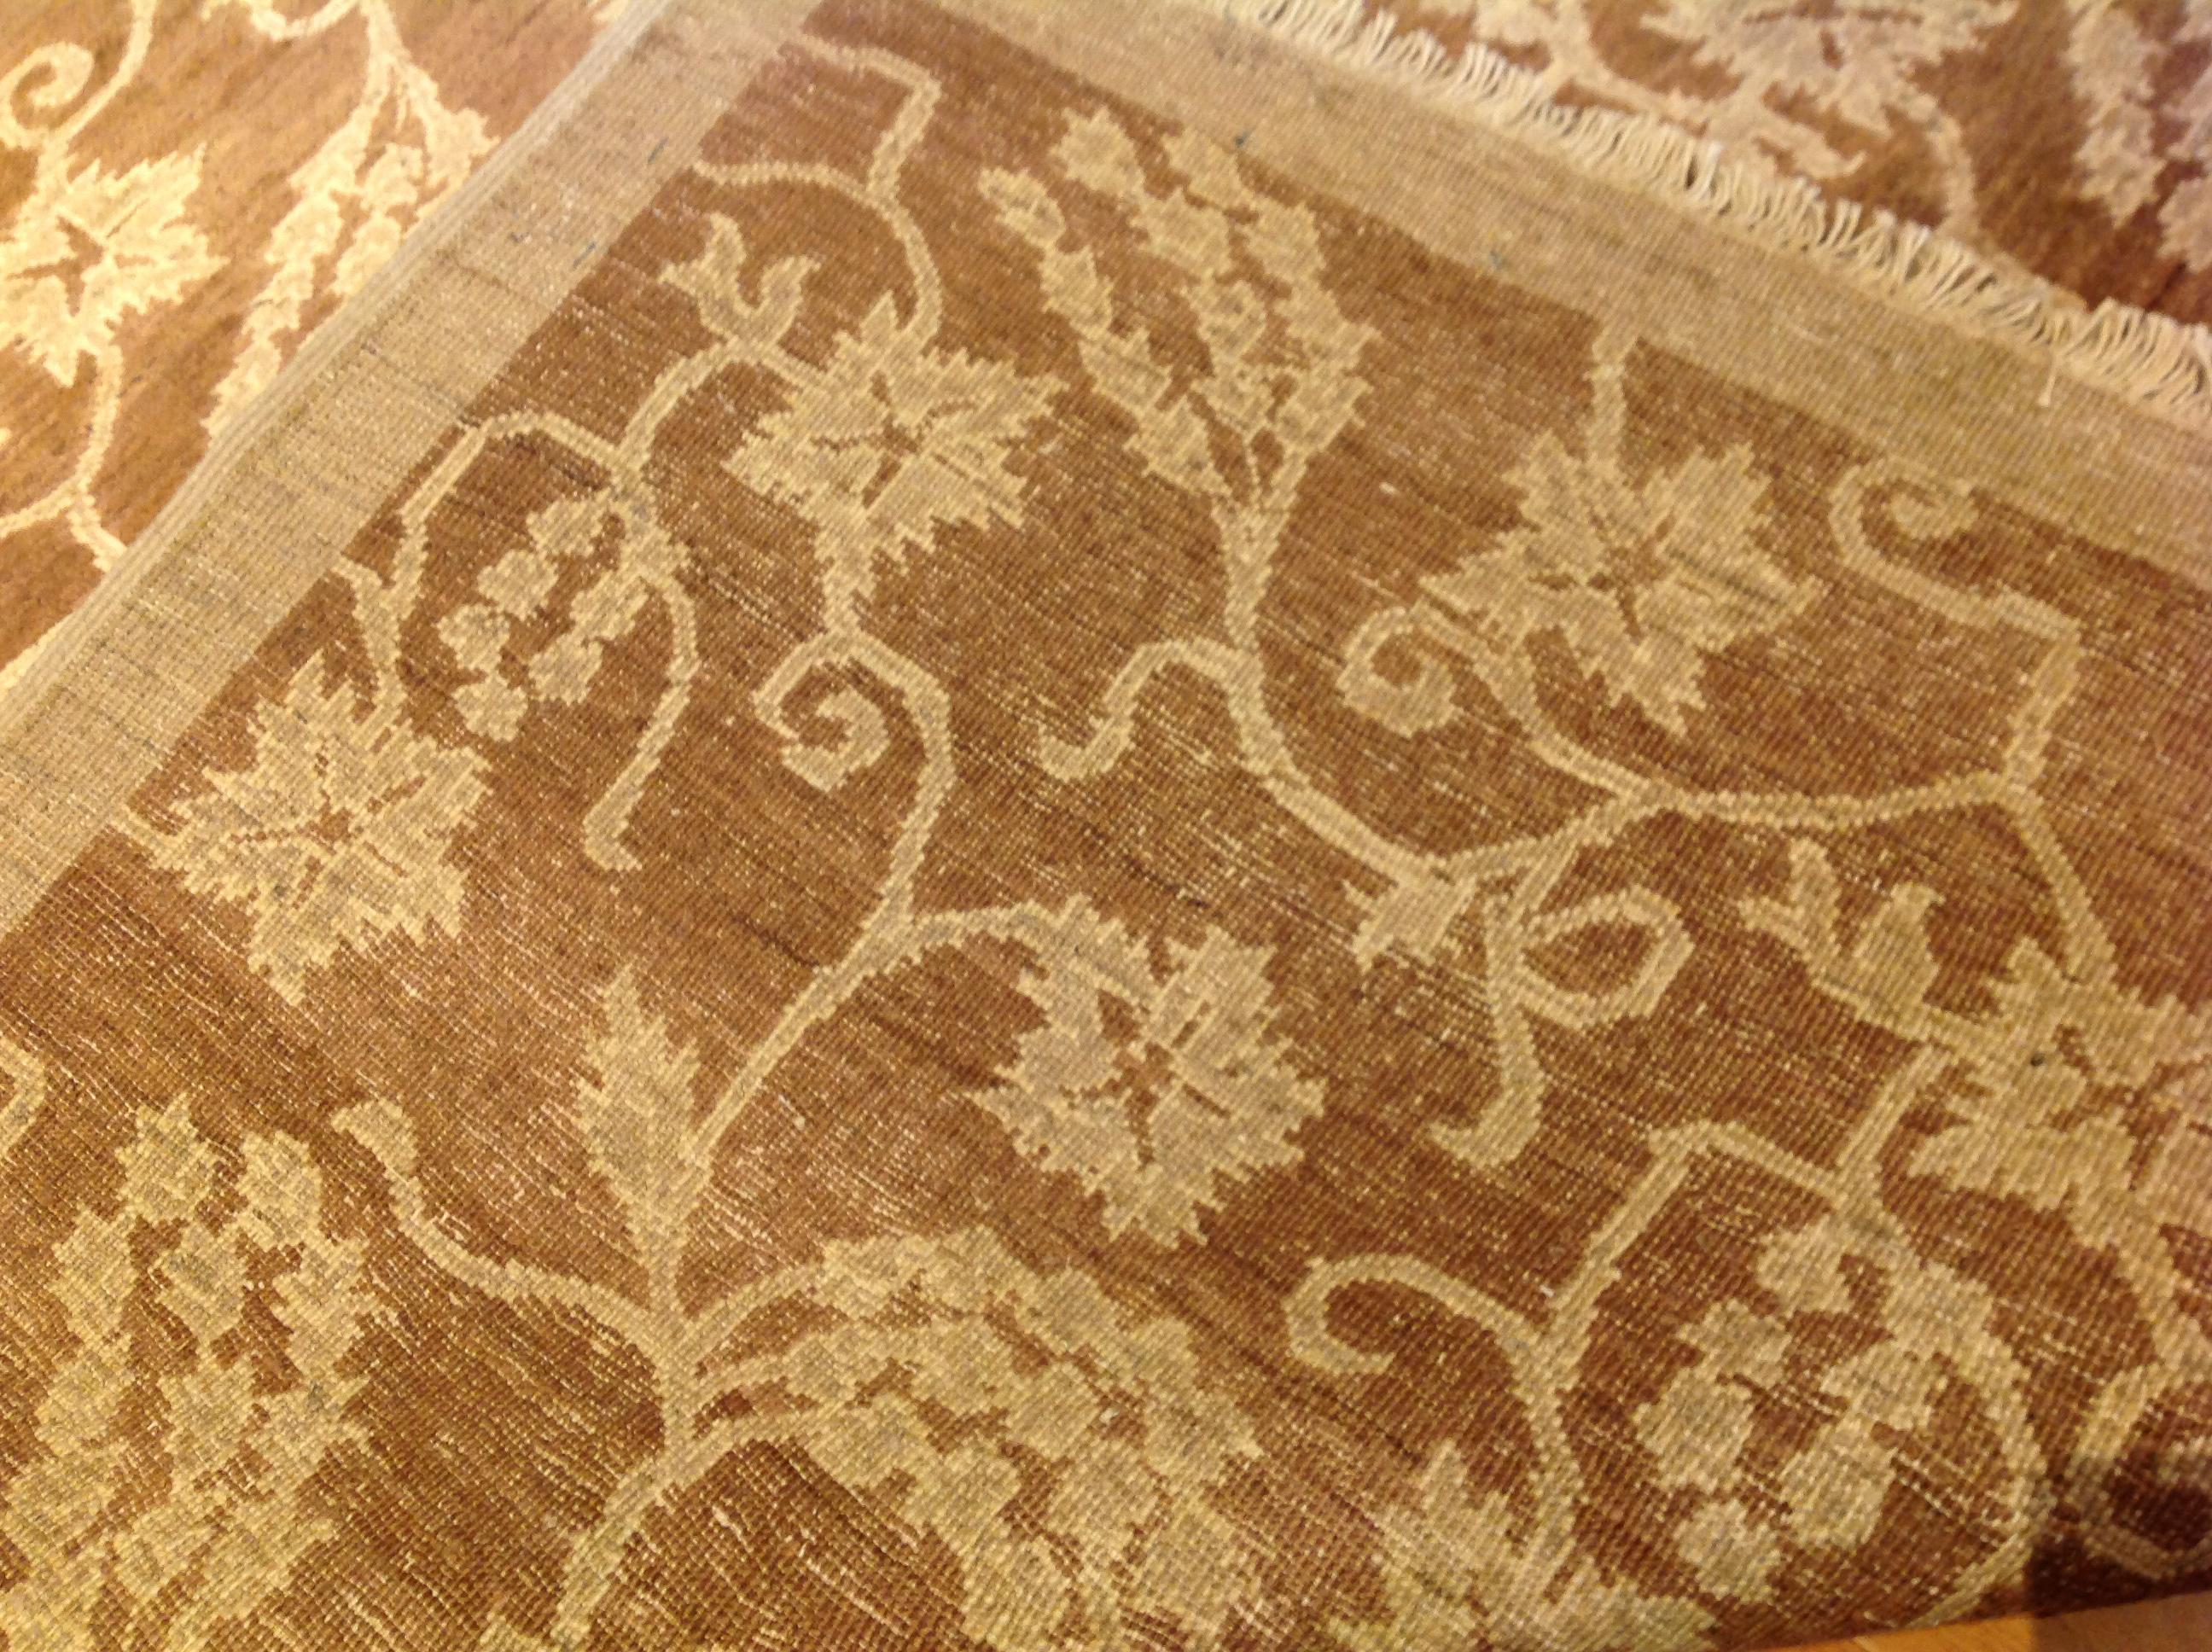 Contemporary Floral All-Over Design Rug in Brown and Beige